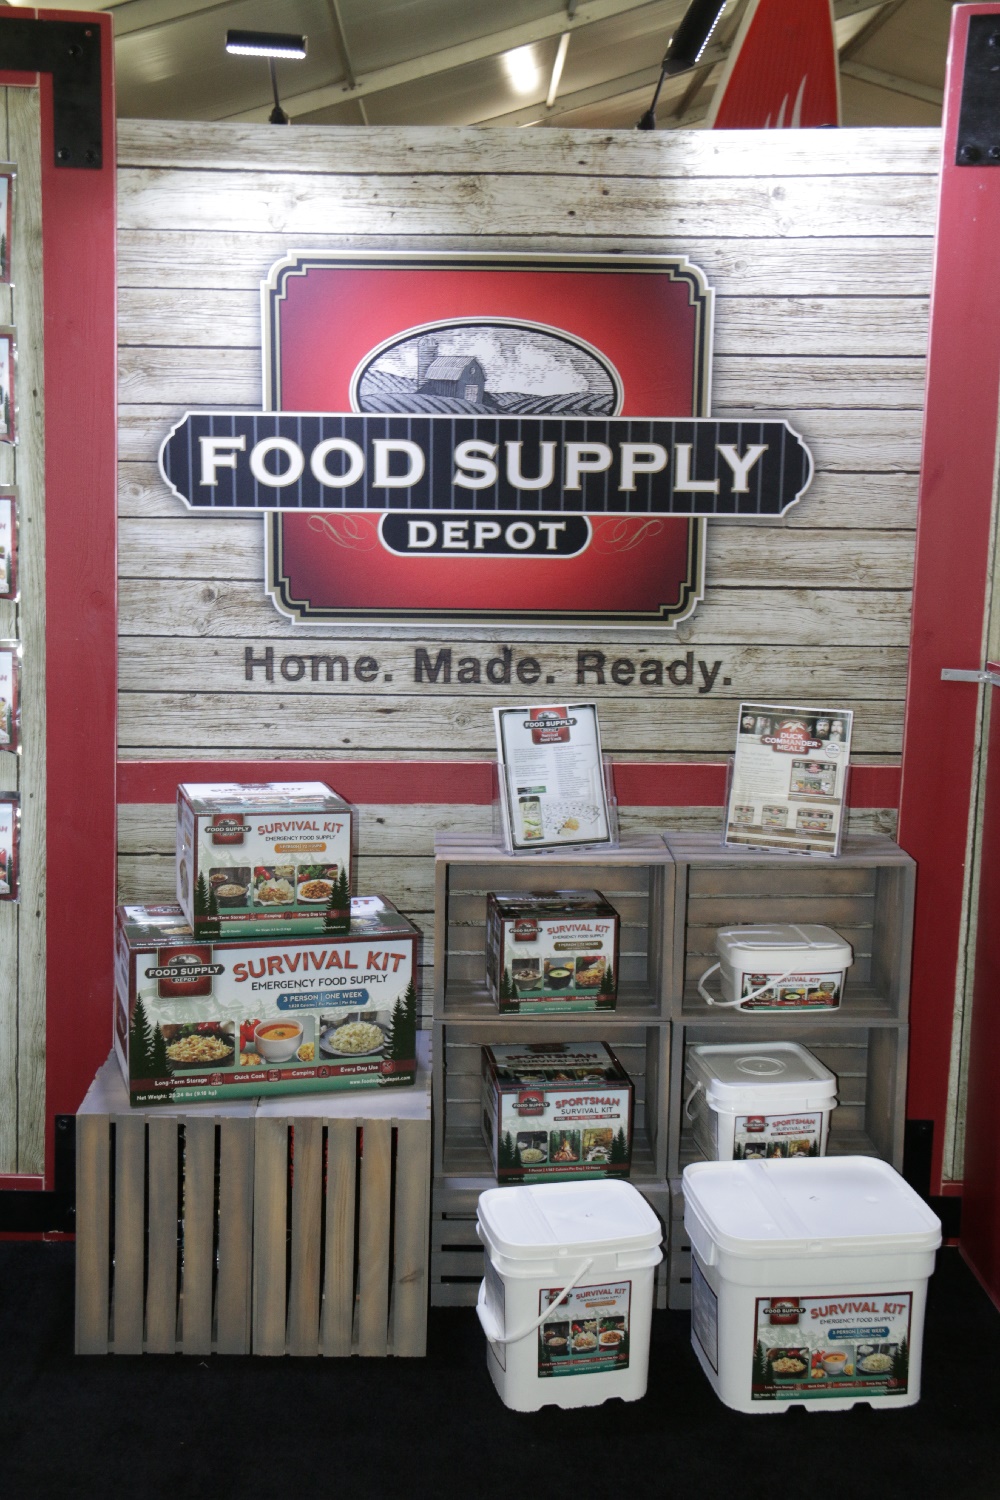 Food for Health International Introduces Food Supply Depot at the Outdoor Retailer Summer Market 2014